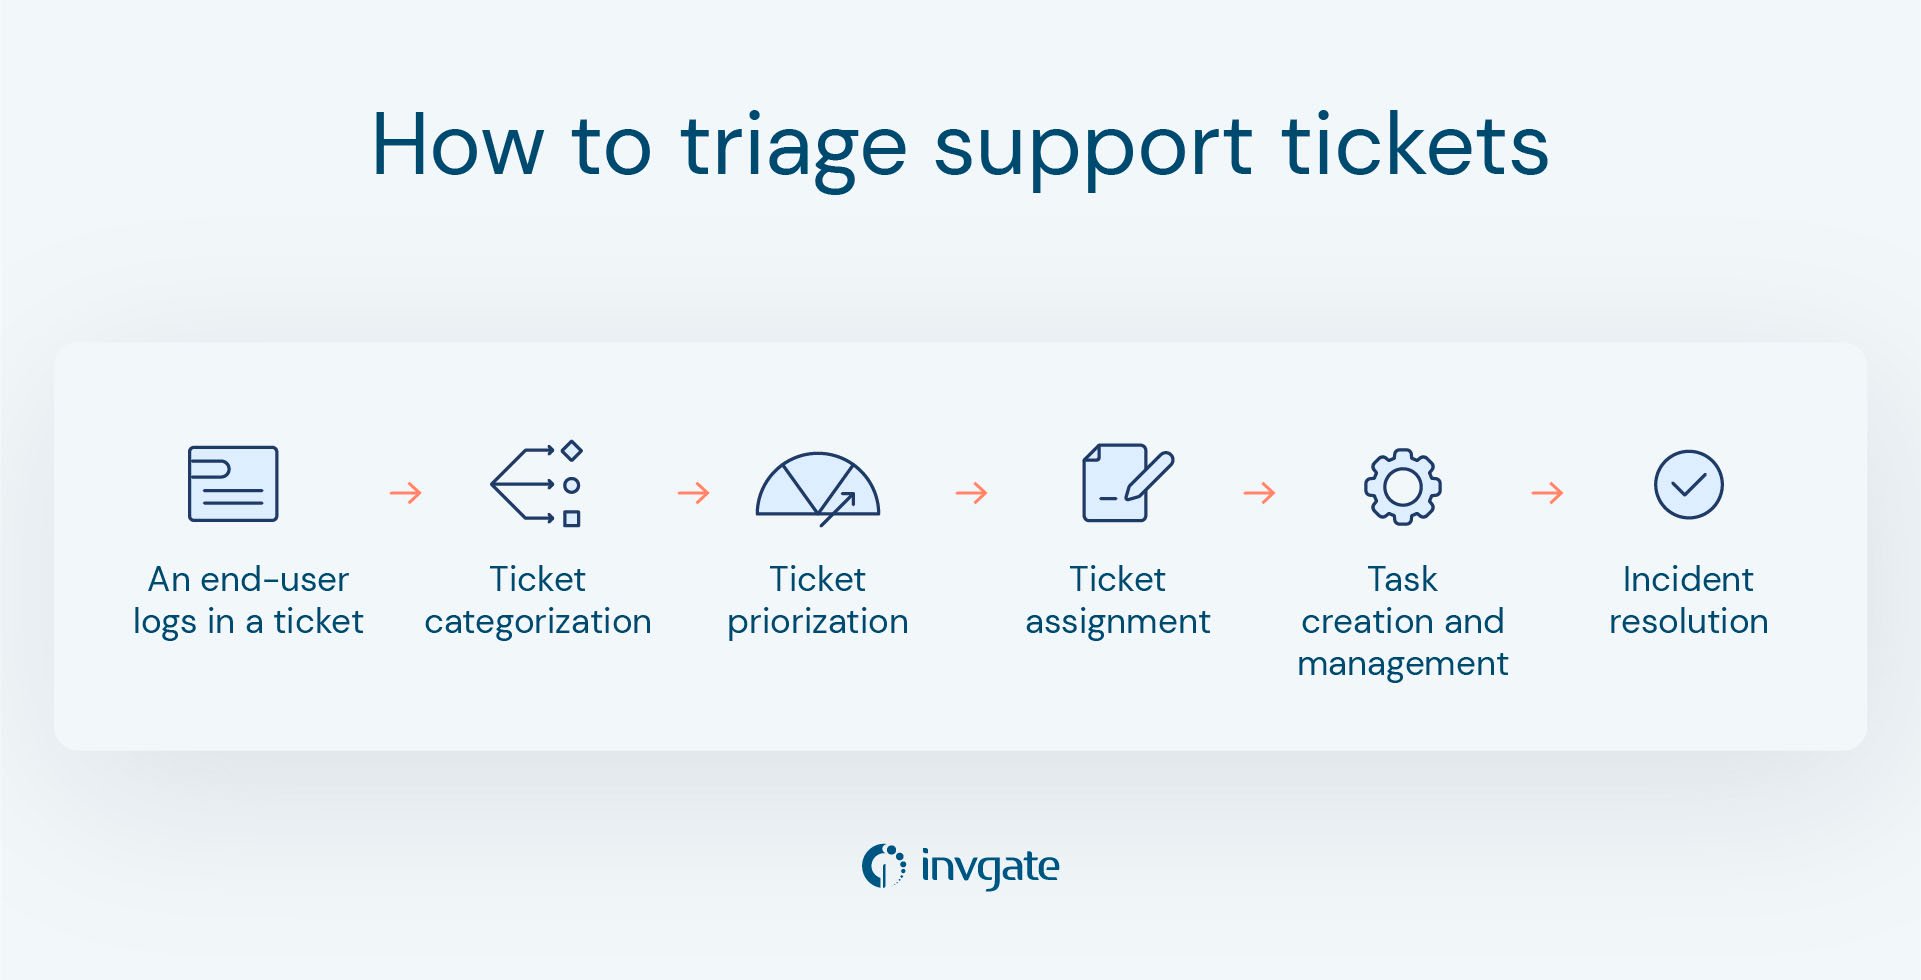 Step-by-step guide on how to triage support tickets.